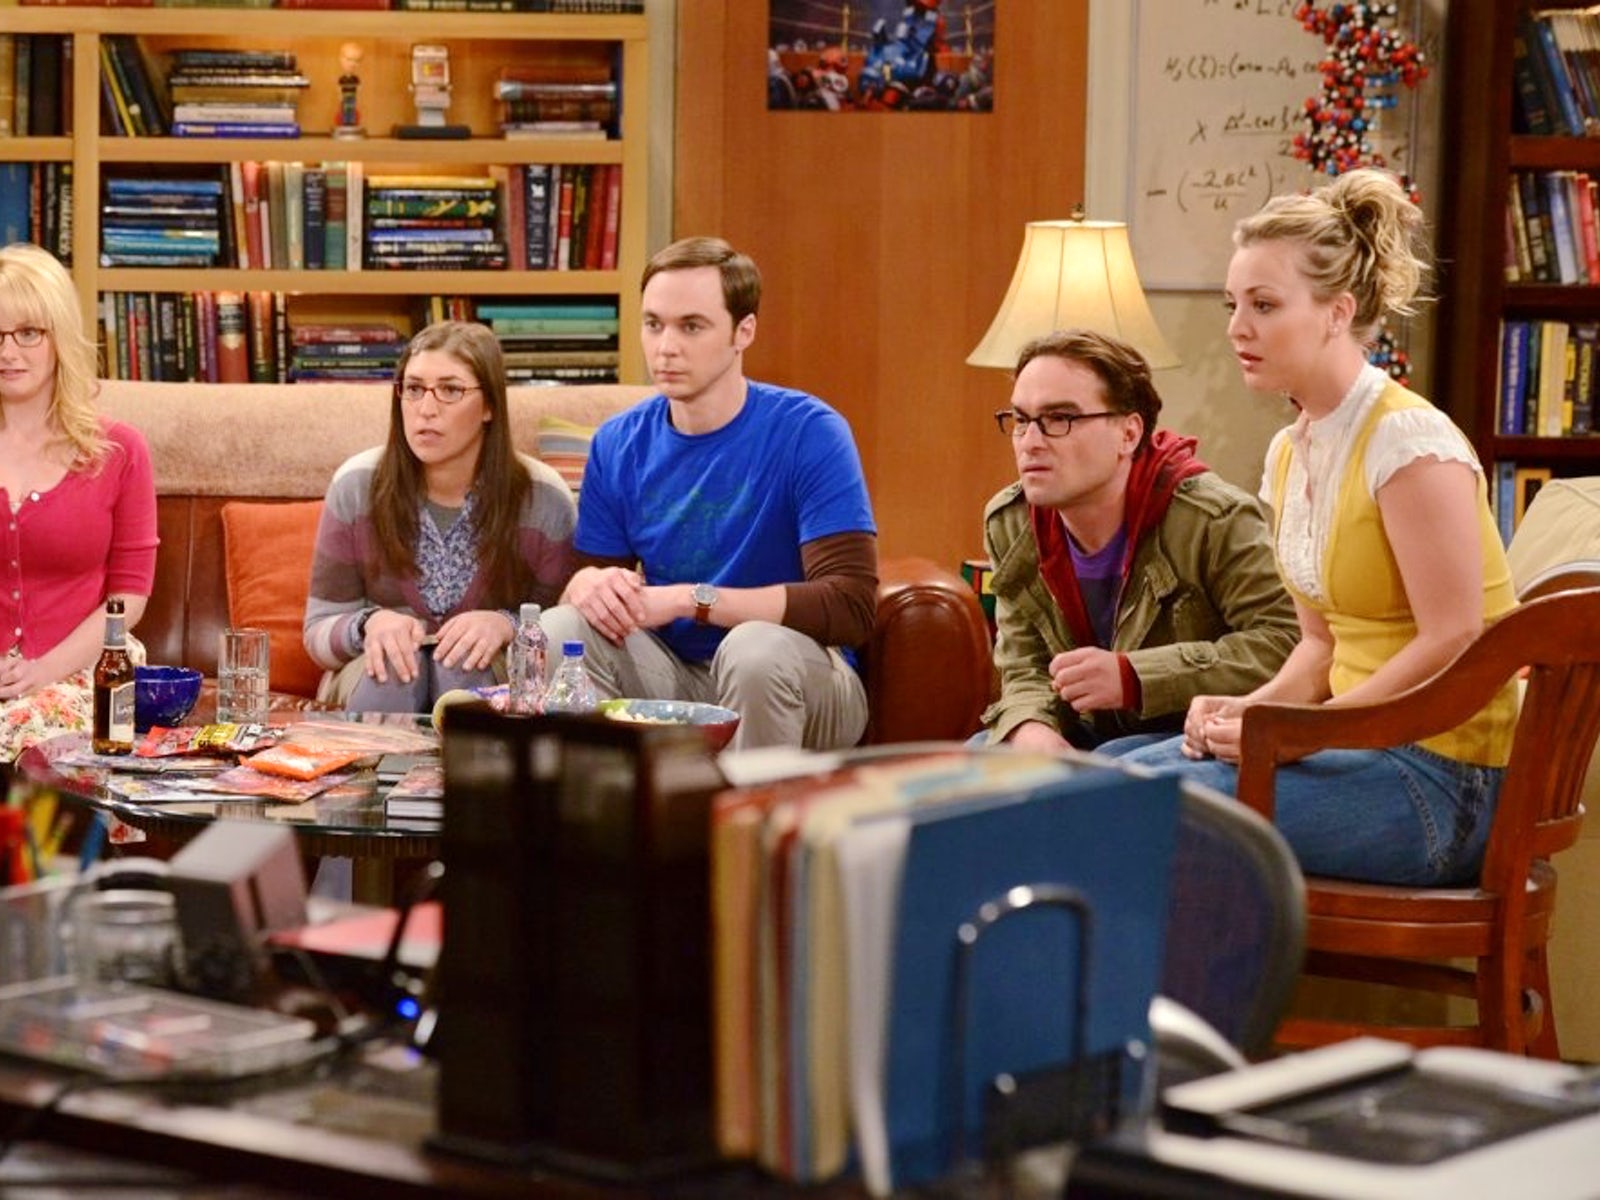 'The Big Bang Theory' stars say they've been 